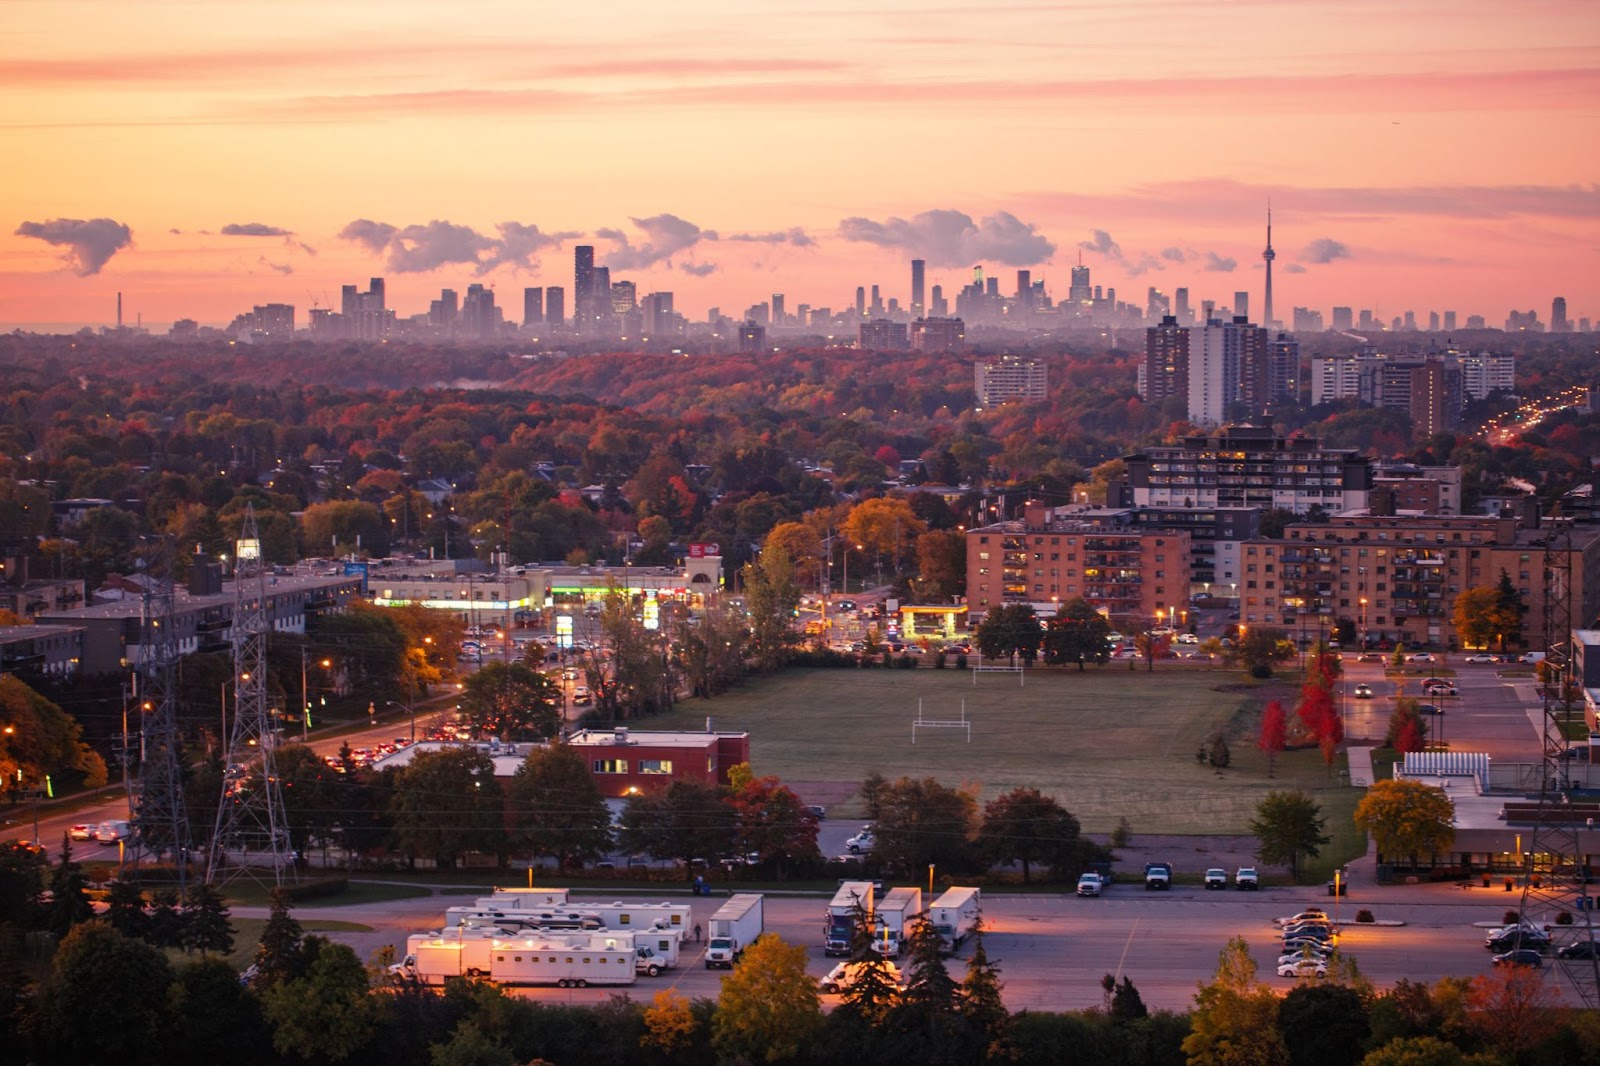 Will the real estate market crash in Toronto?